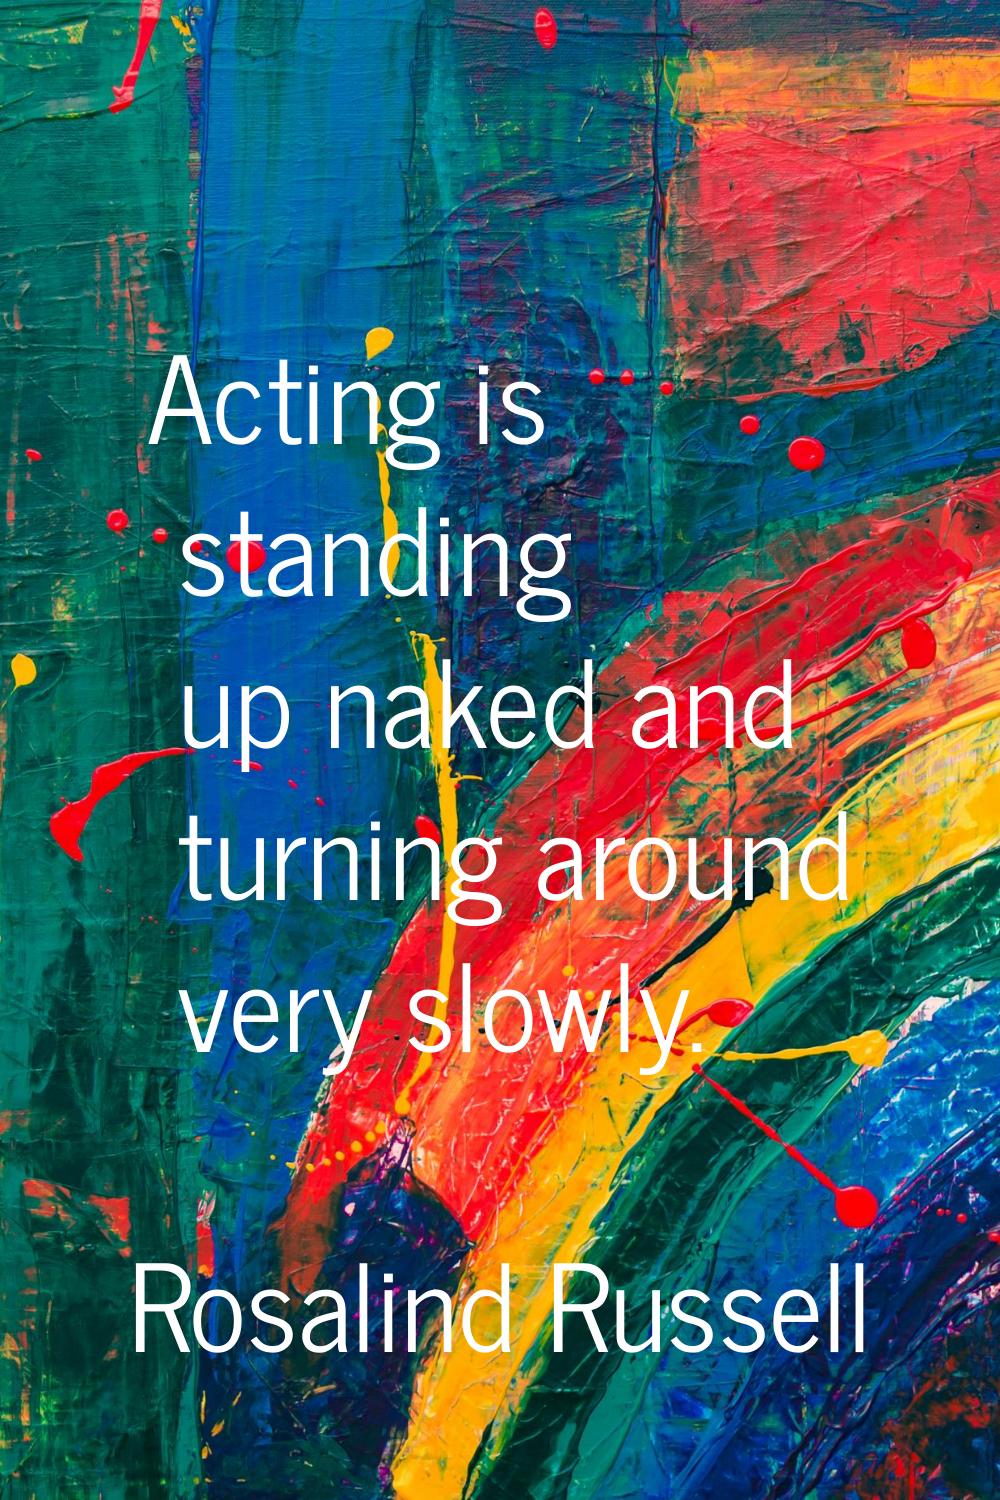 Acting is standing up naked and turning around very slowly.